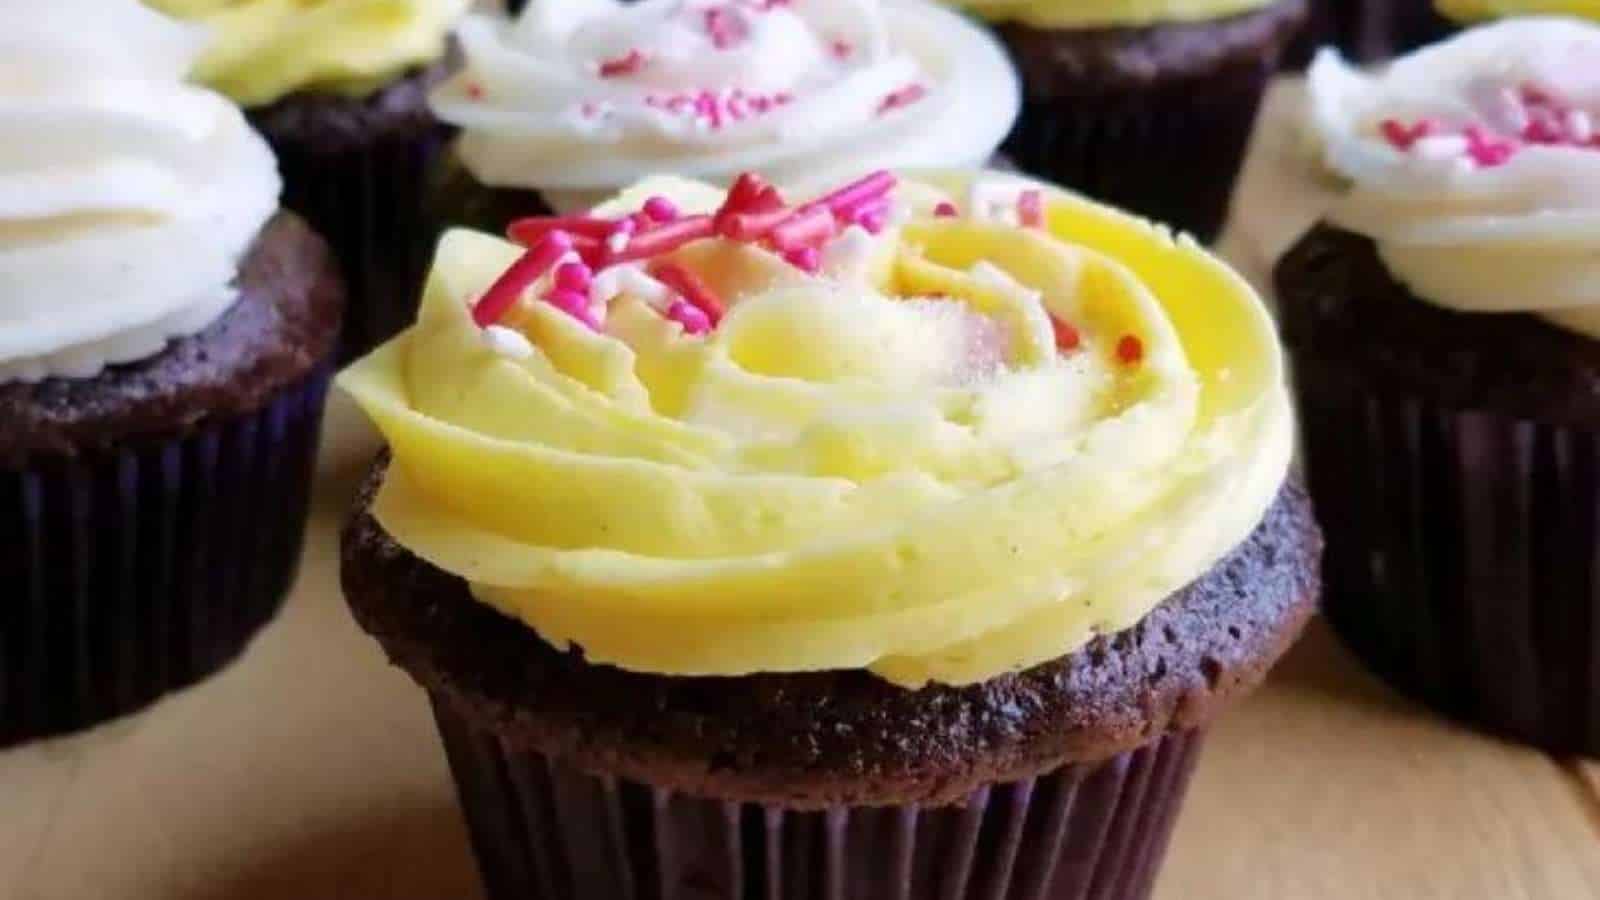 A group of cupcakes with yellow and white frosting.